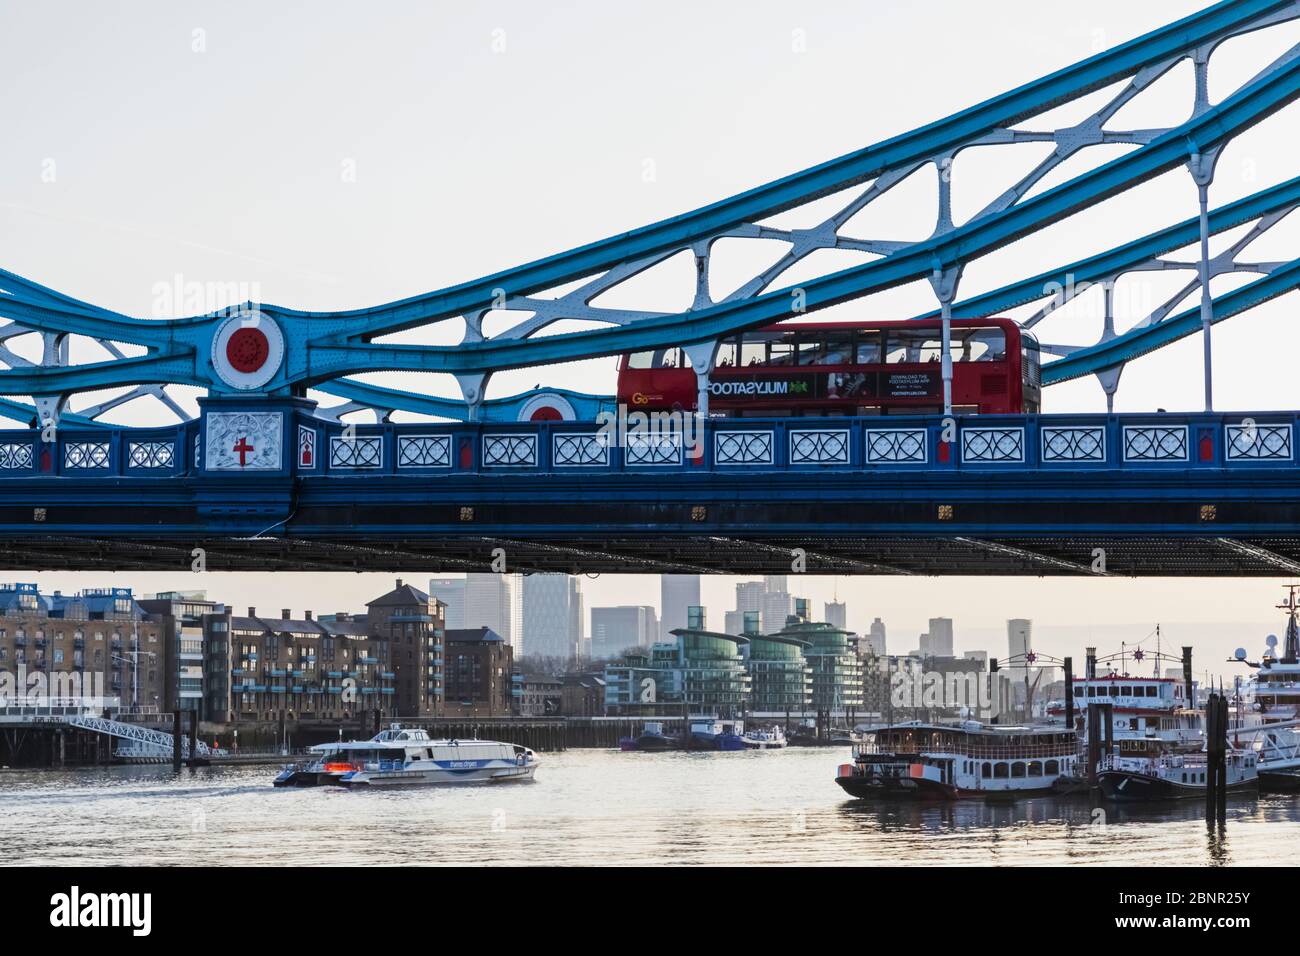 England, London, Double Decker Buses Crossing Tower Bridge with Canary Wharf Skyline in The Back at Dawn Stock Photo